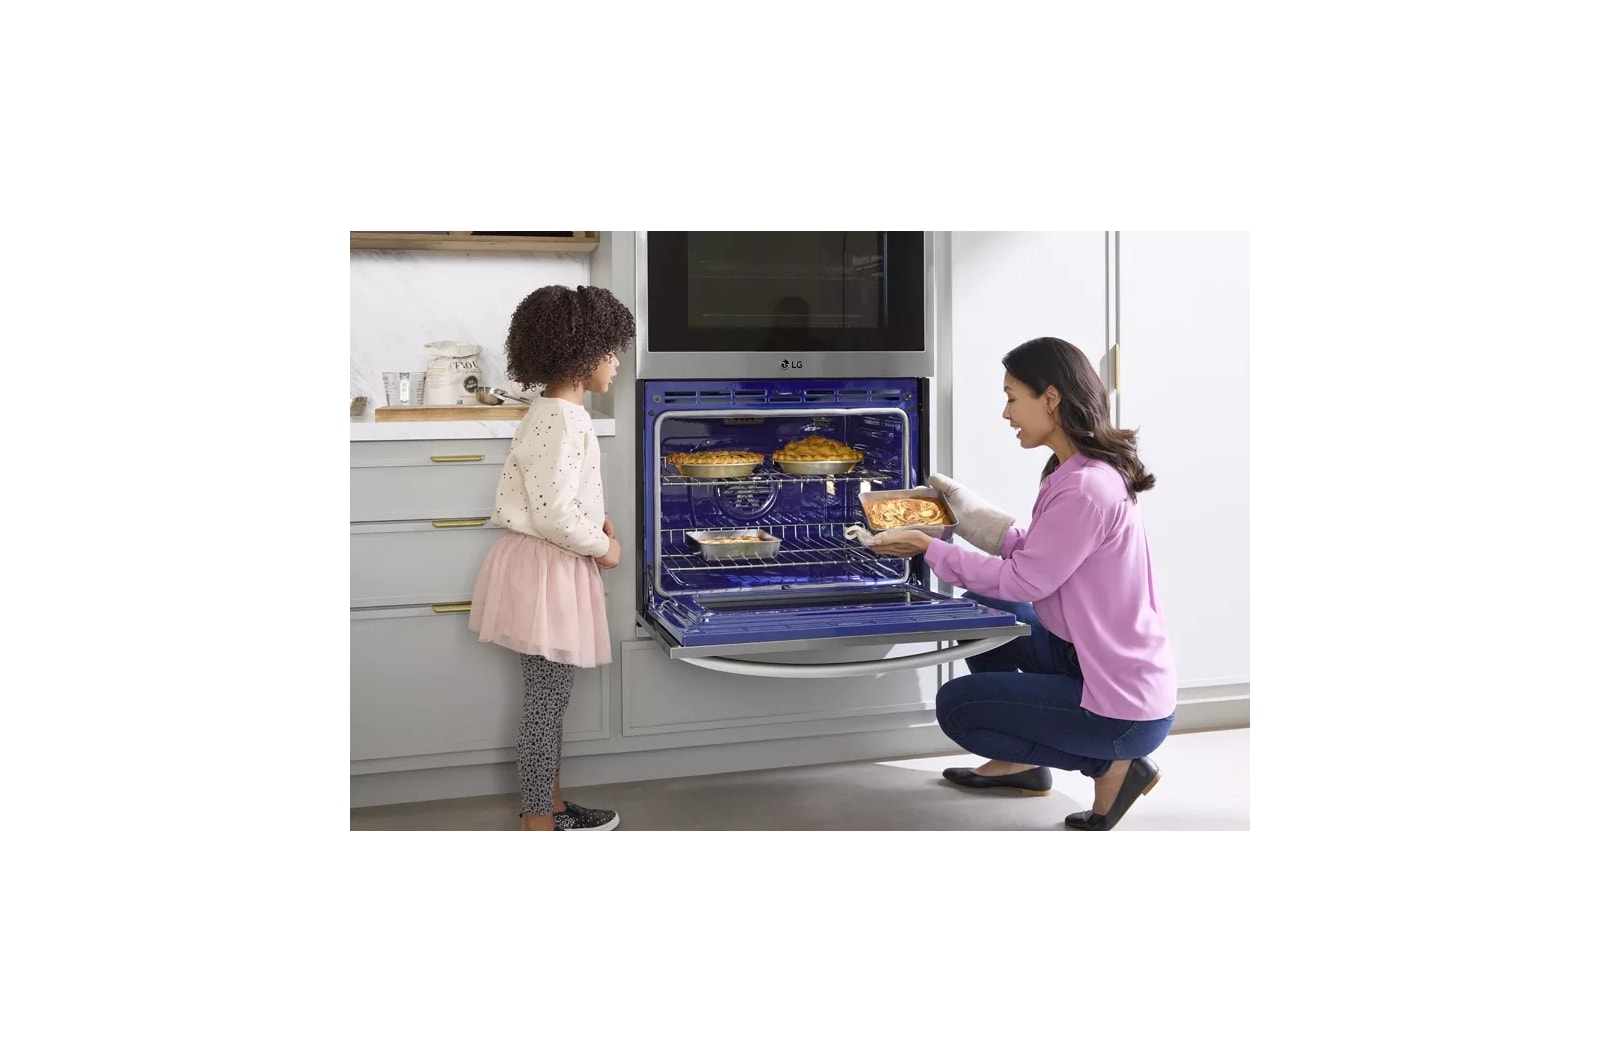 LG WDEP9423F 30 Inch Double Electric Smart Wall Oven with 9.4 cu. ft.  Convection Ovens, EasyClean® + Self Clean, Air Fry, ThinQ® Technology, and  SmoothTouch® Controls: PrintProof™ Stainless Steel